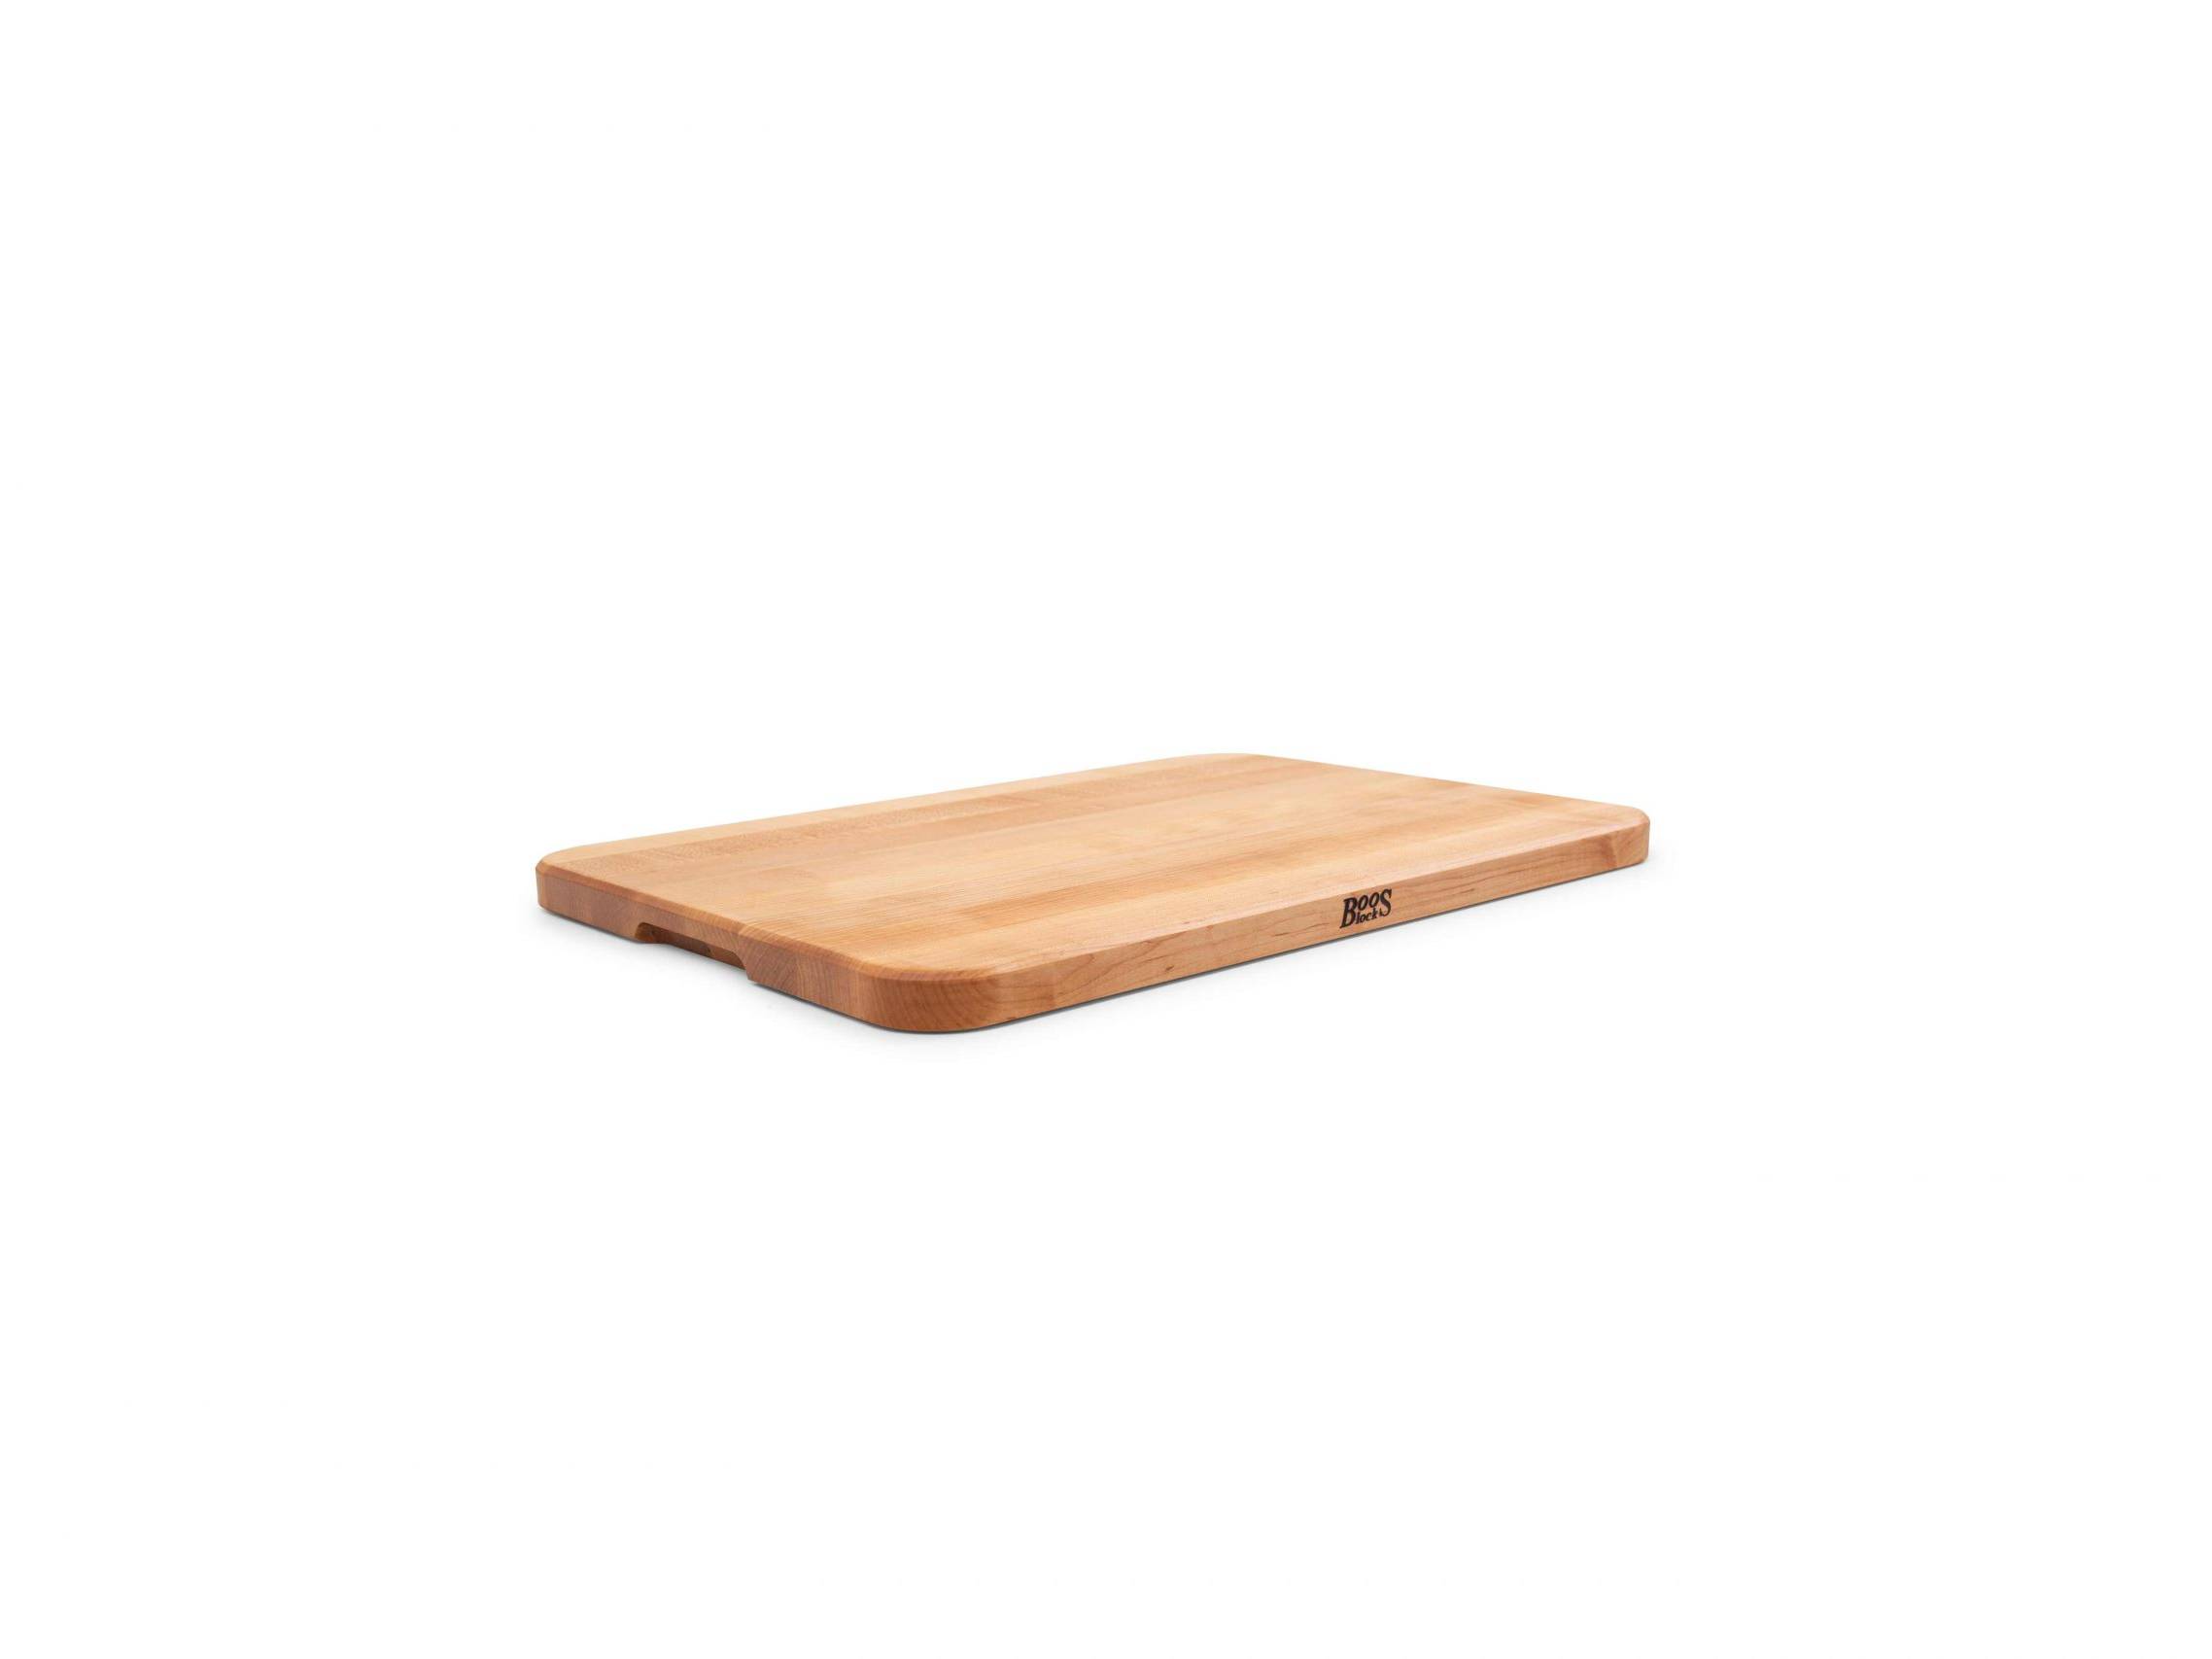 Chop-N-Serve Hard Maple Cutting Board with recessed grip; can be used on both sides 7